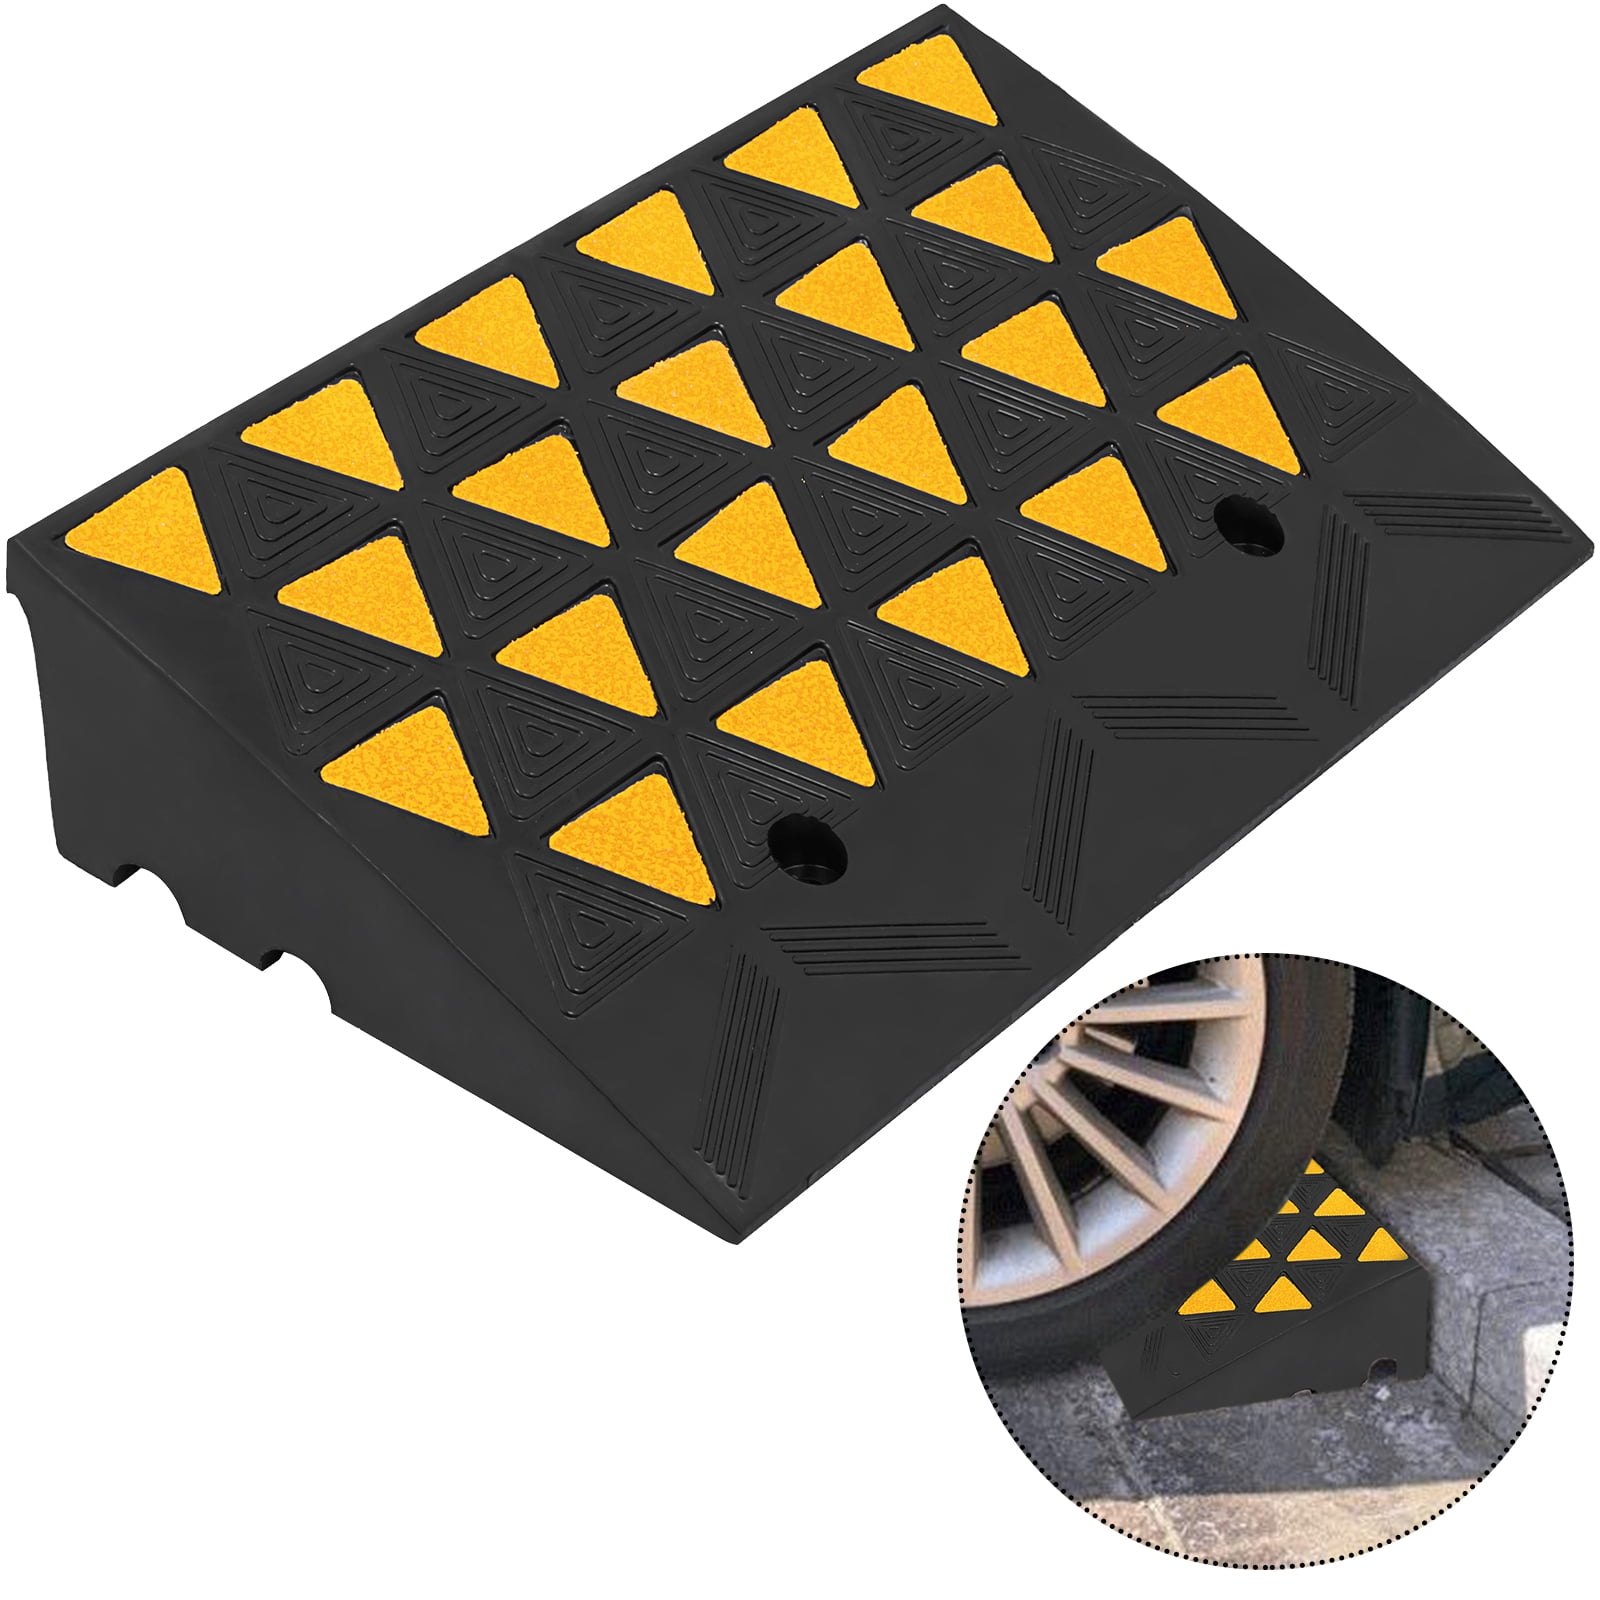 Parking Lot Entrance Curb Ramps Sturdy Durable Truck Ramps Home Use Step Mat Kerb Ramps Color : Black, Size : 100256CM 11 way bike CSQ-Ramps 4-11CM Multiple Heights Vehicle Ramps 